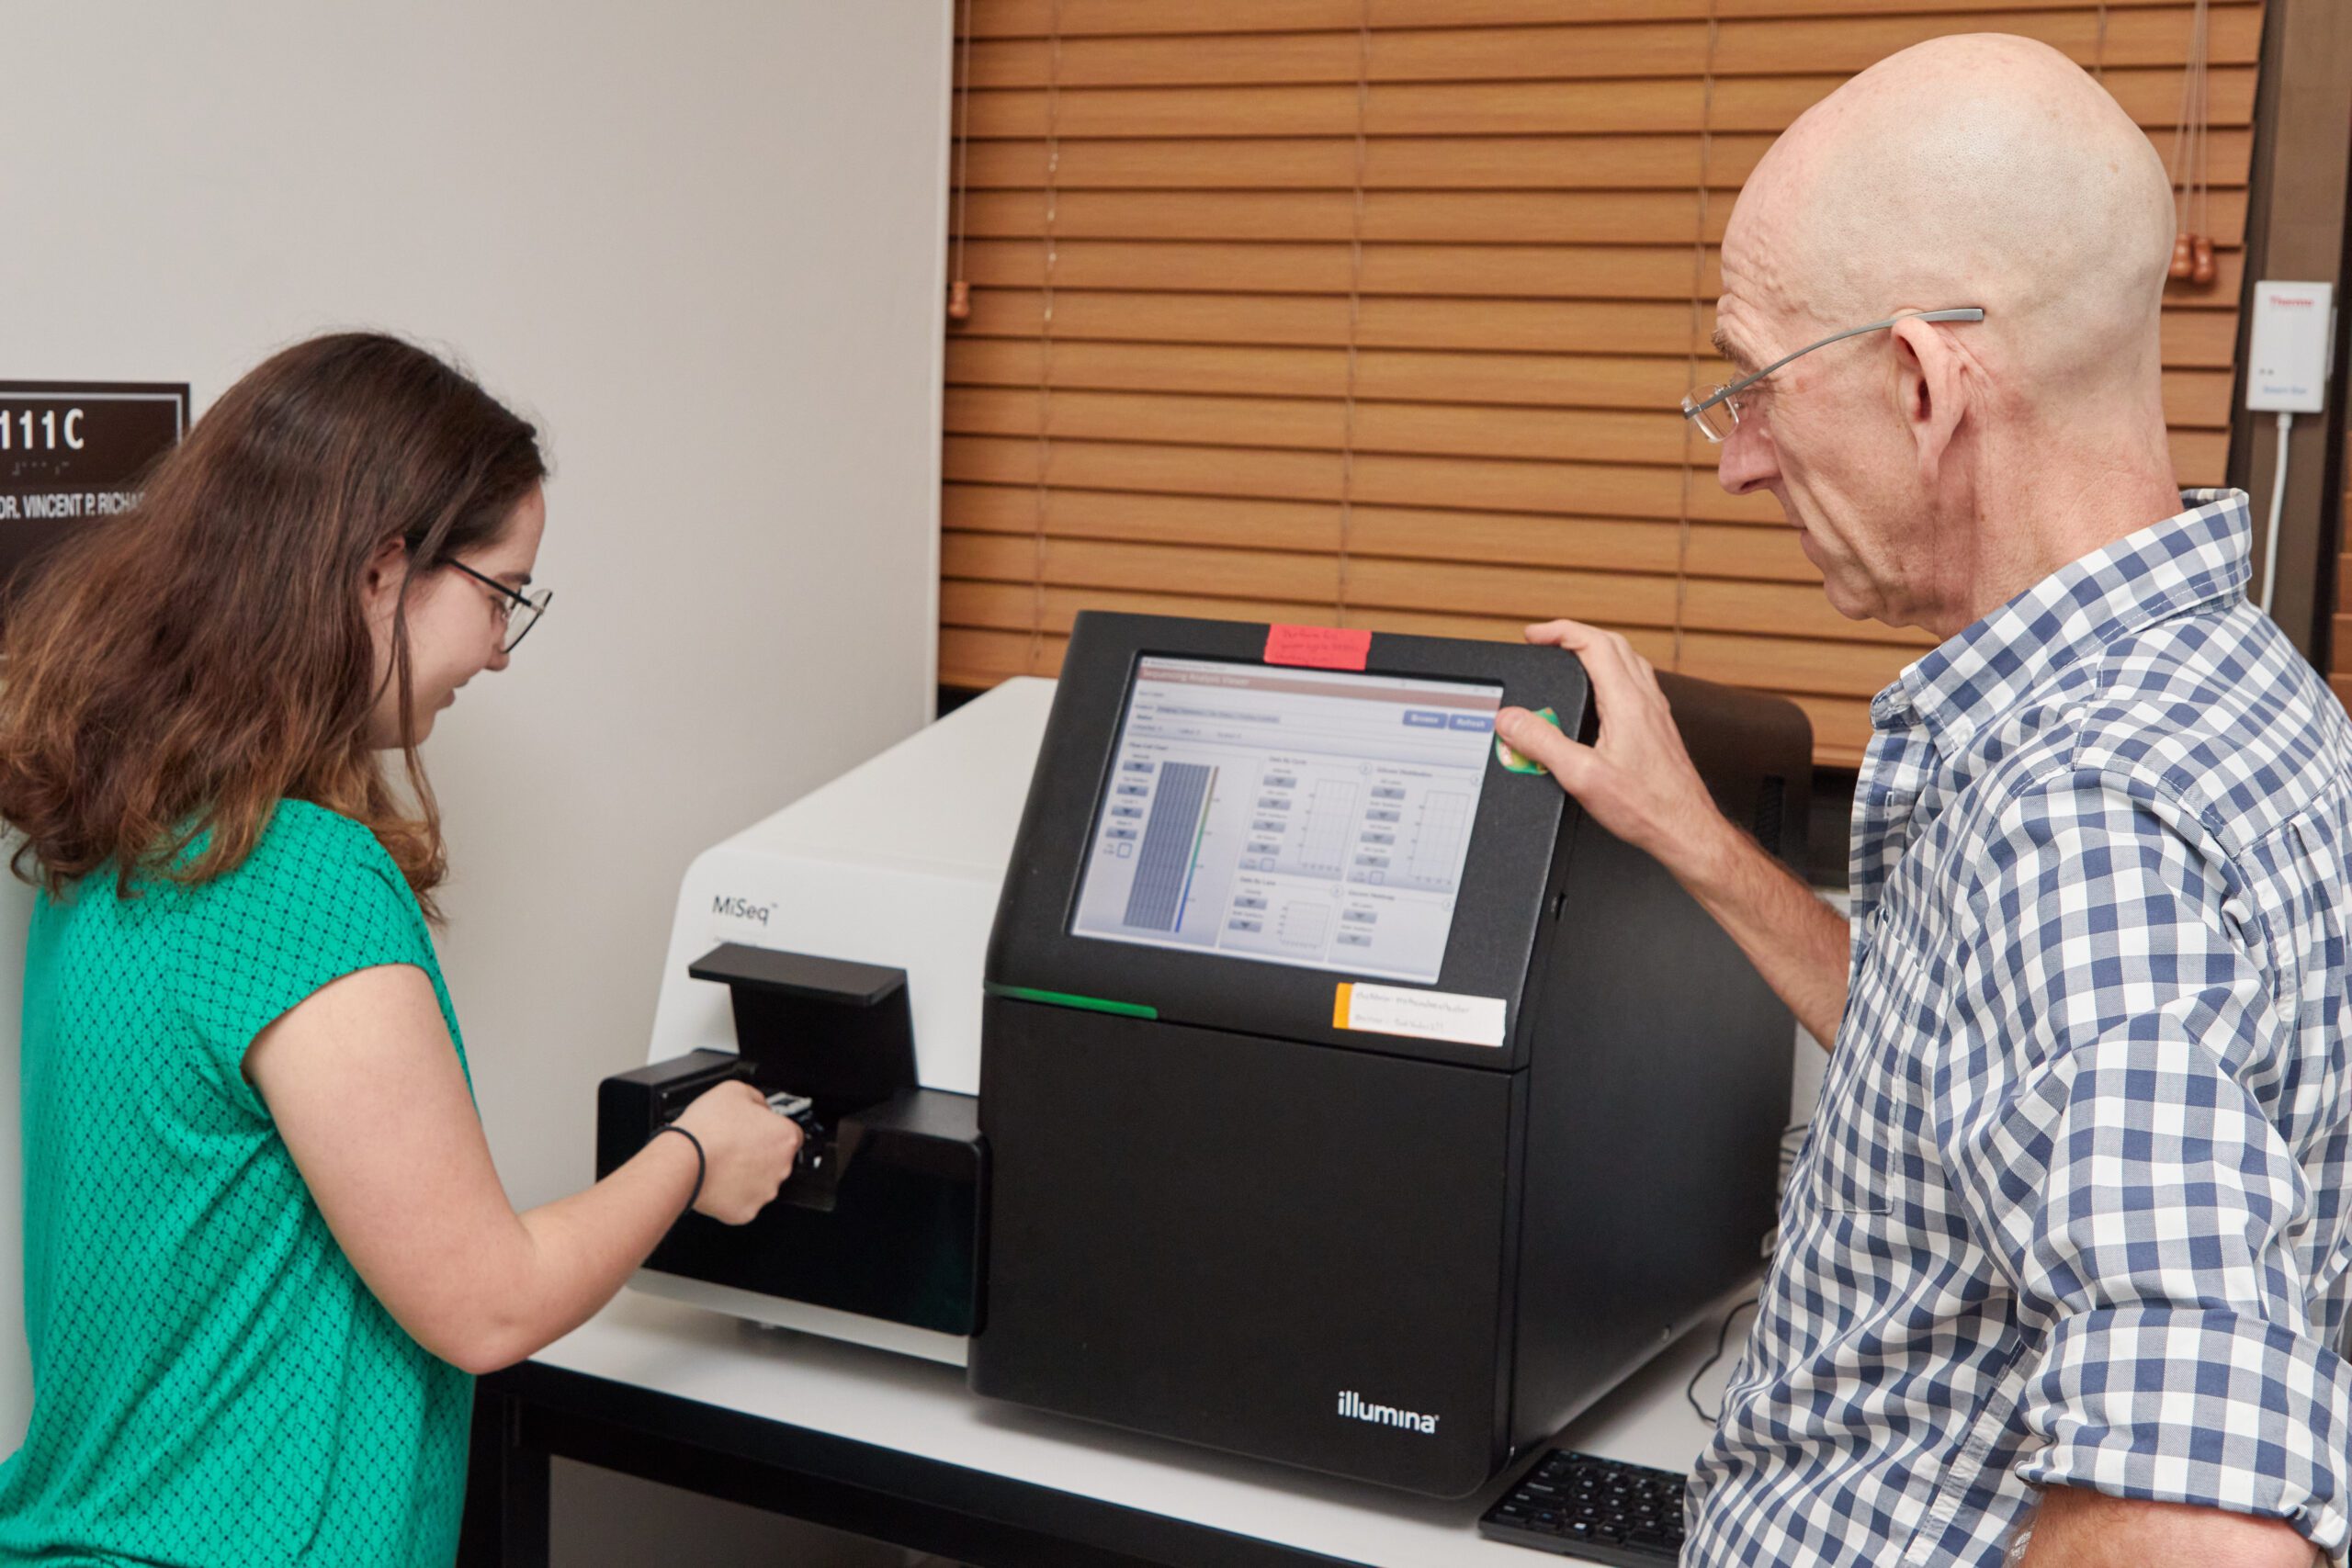 A woman wearing a green shirt is inserting something into a sequencing machine while a man watches.